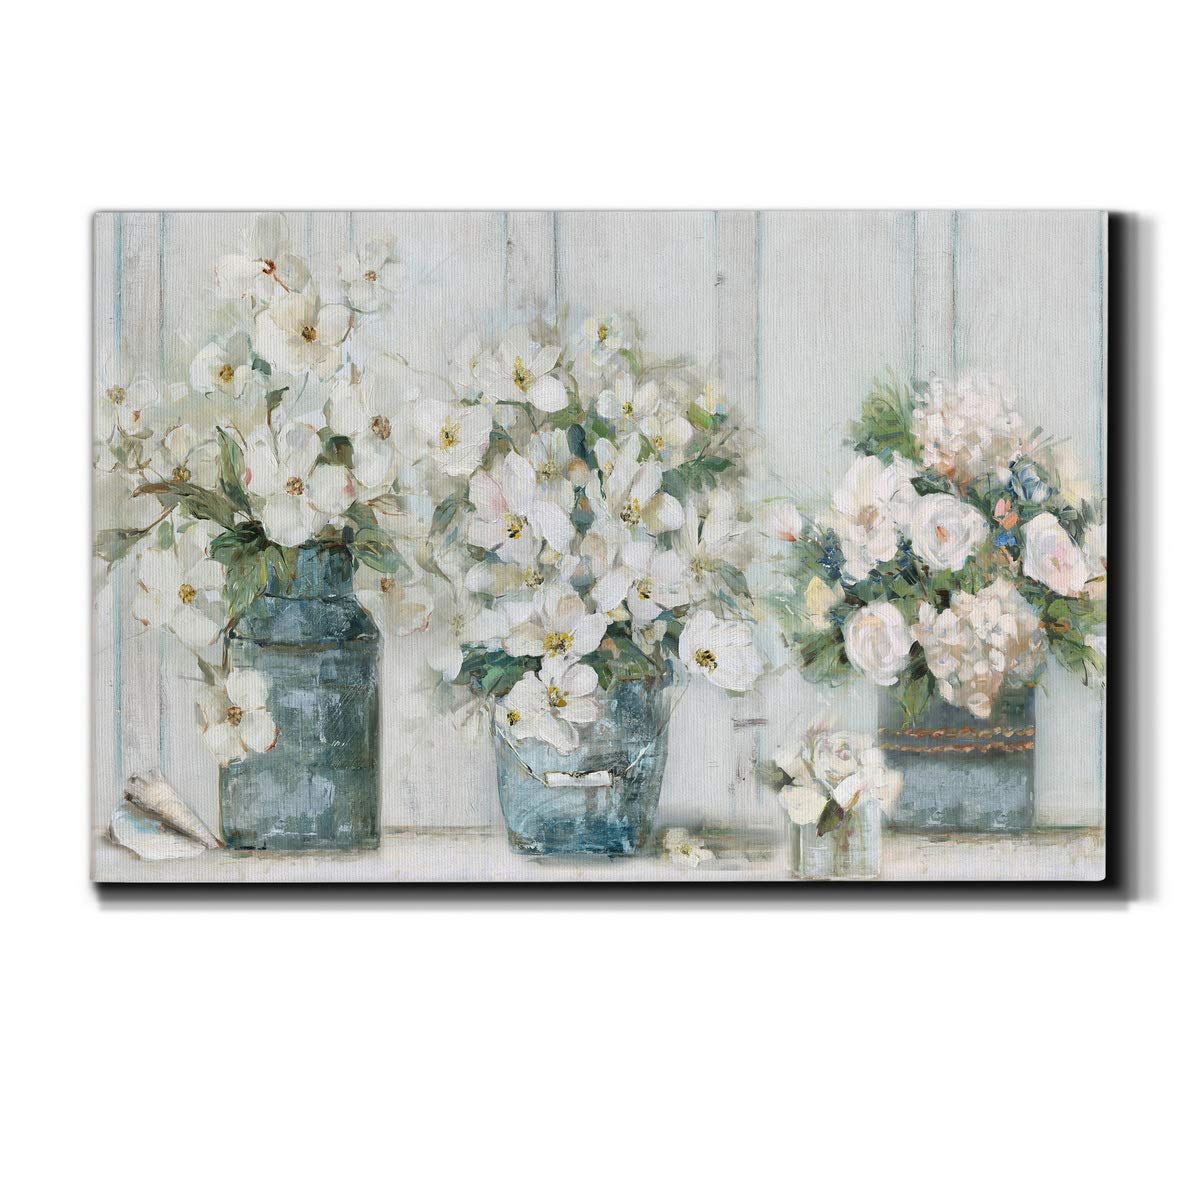 WEXFORD HOME Landscape Canvas Wall Art Abstract Floral Forest Modern Pictures Artwork Decoration for Living Room Kitchen Bathroom Office, Ready to Hang